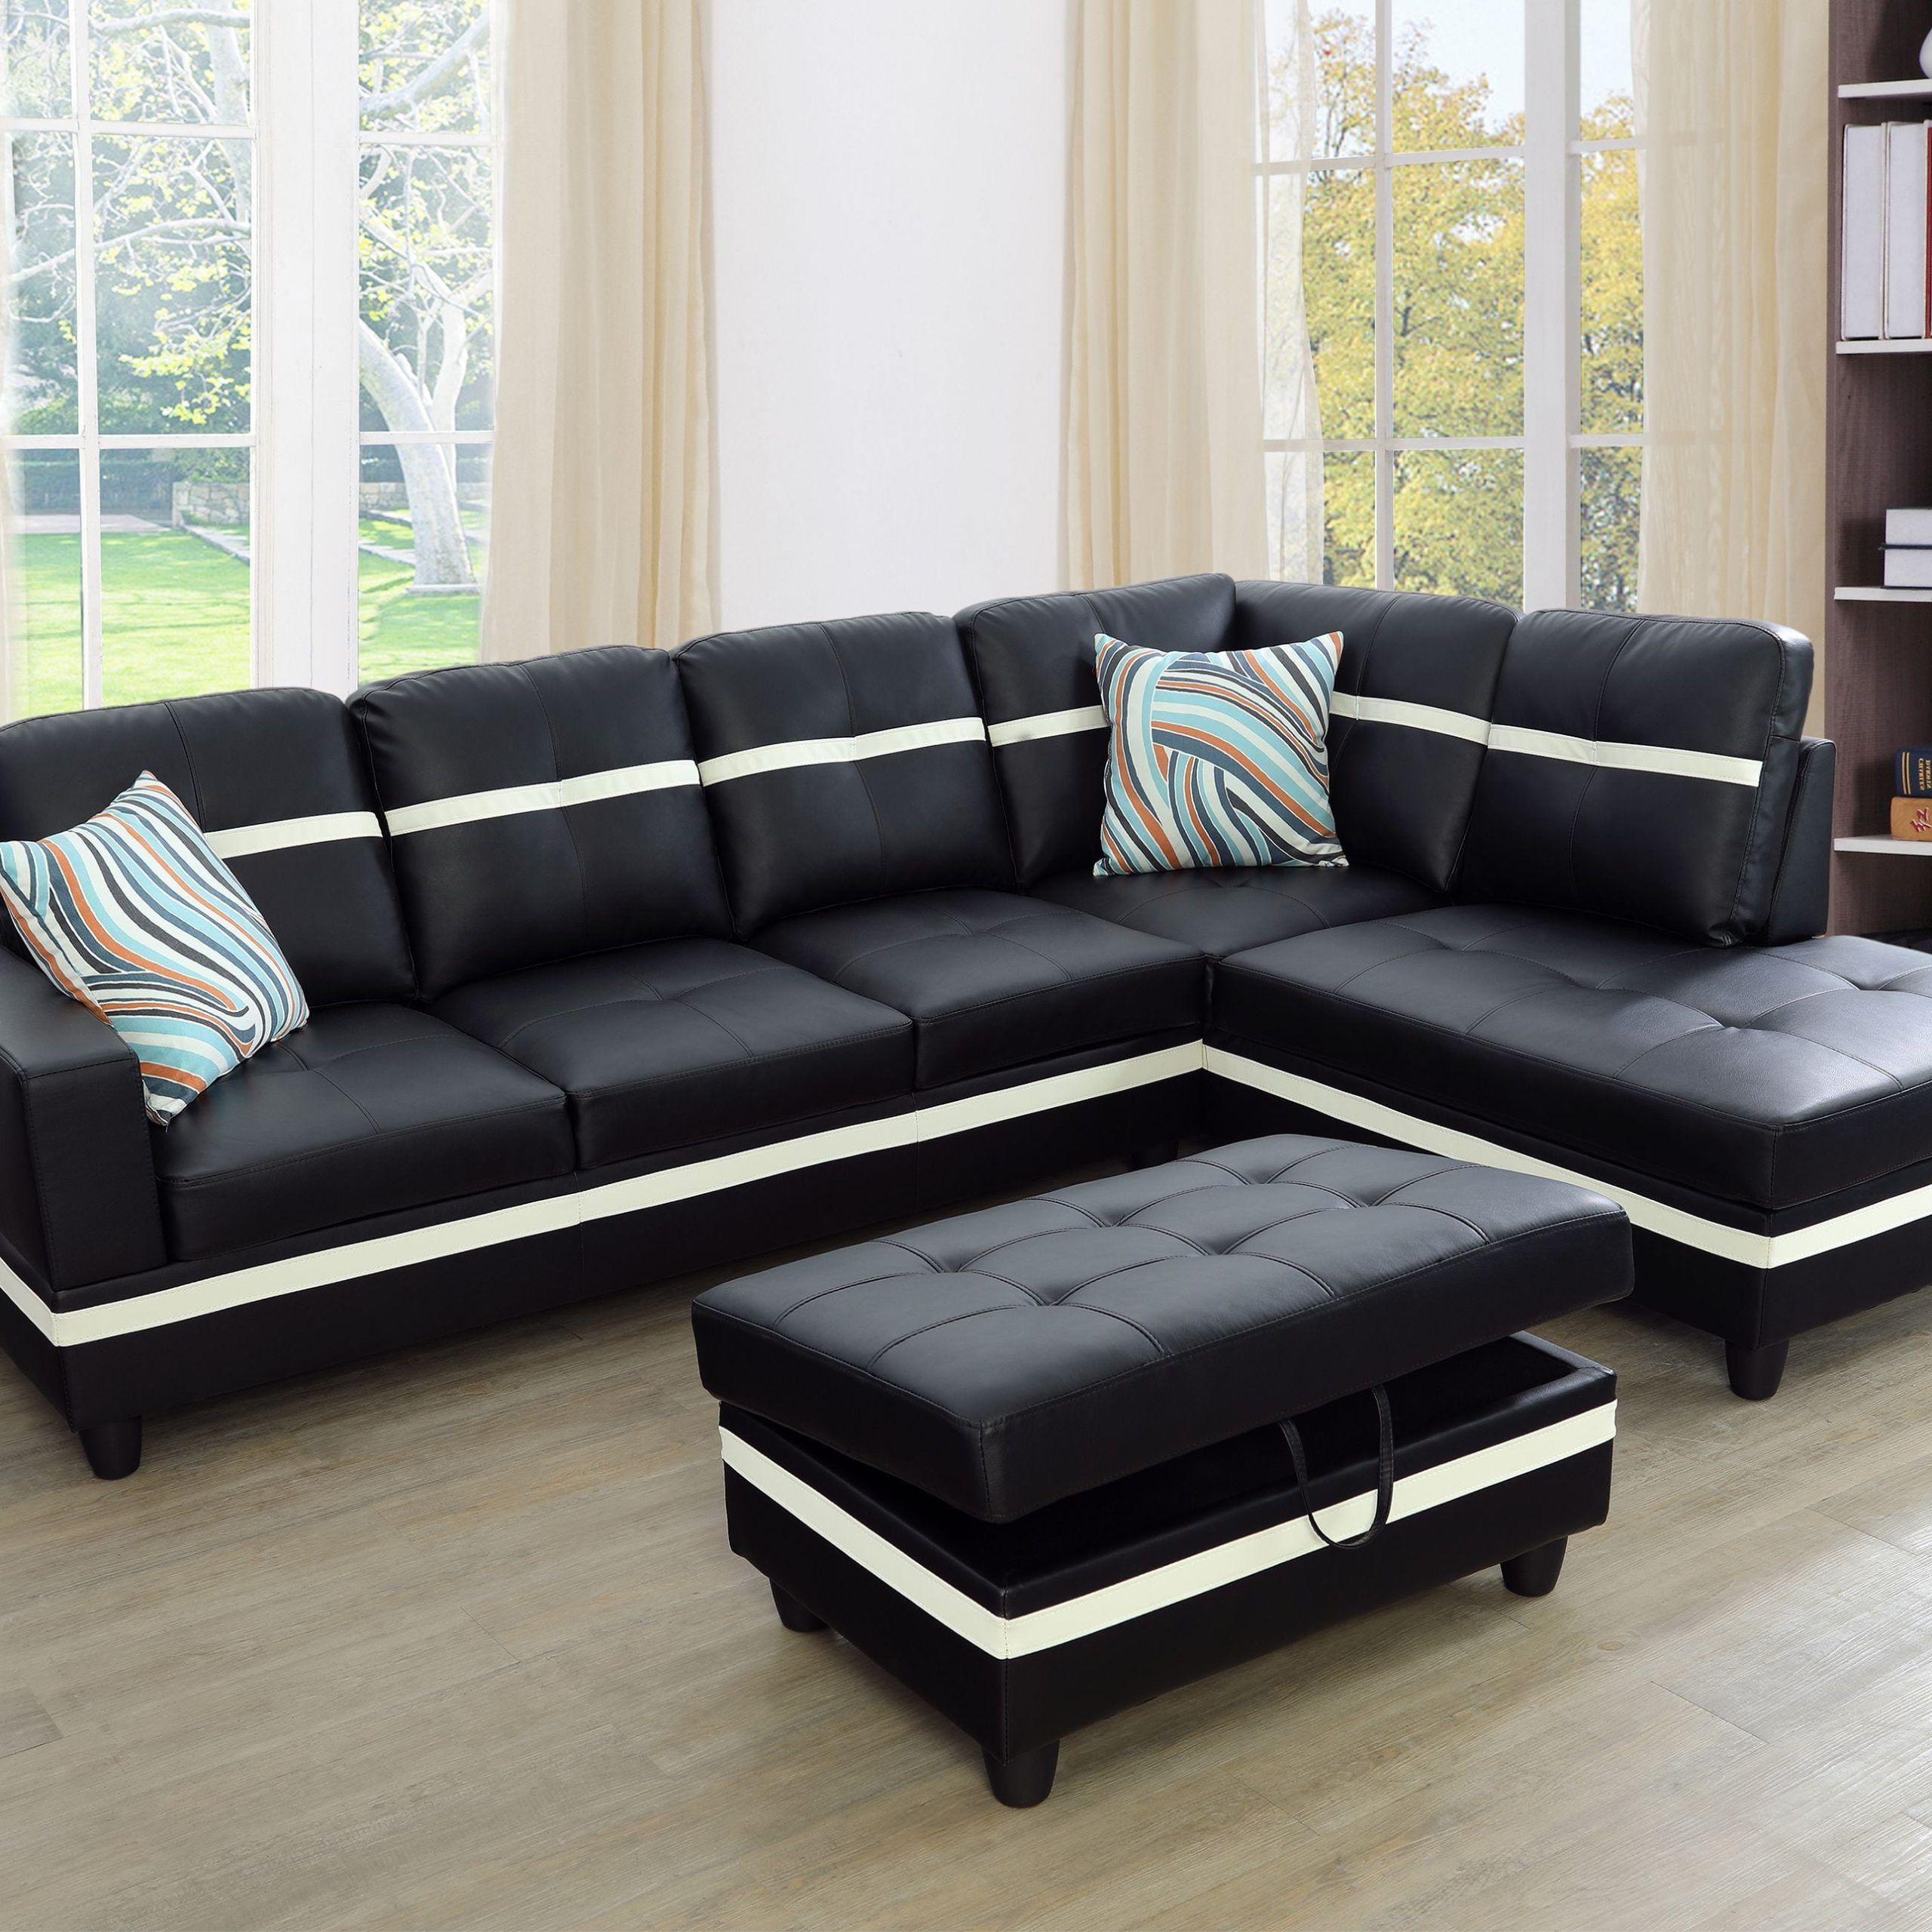 Aycp Furniture_new Style_ L Shape Sectional Sofa Set With Storage Intended For Faux Leather Sectional Sofa Sets (Gallery 4 of 21)